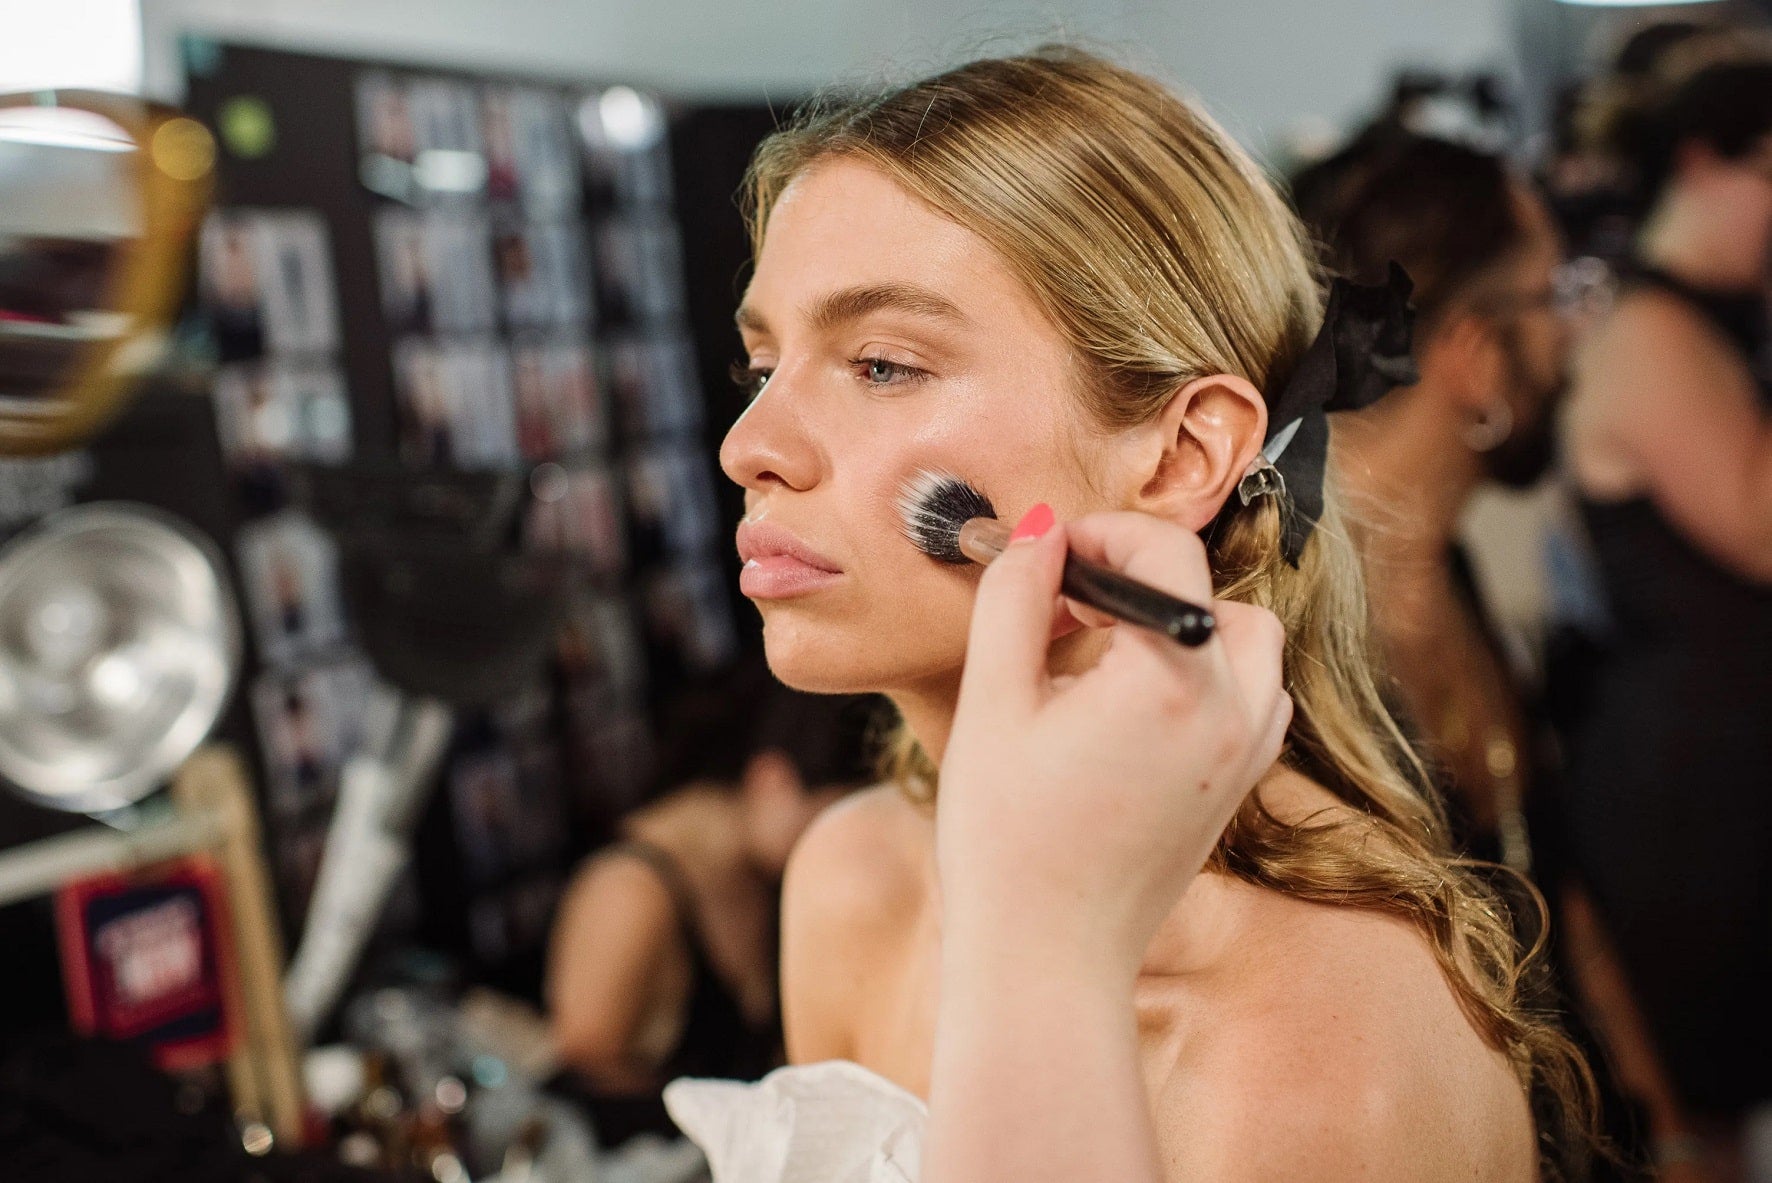 6 Makeup Artist Pro Tricks to Take Your Game to the Next Level